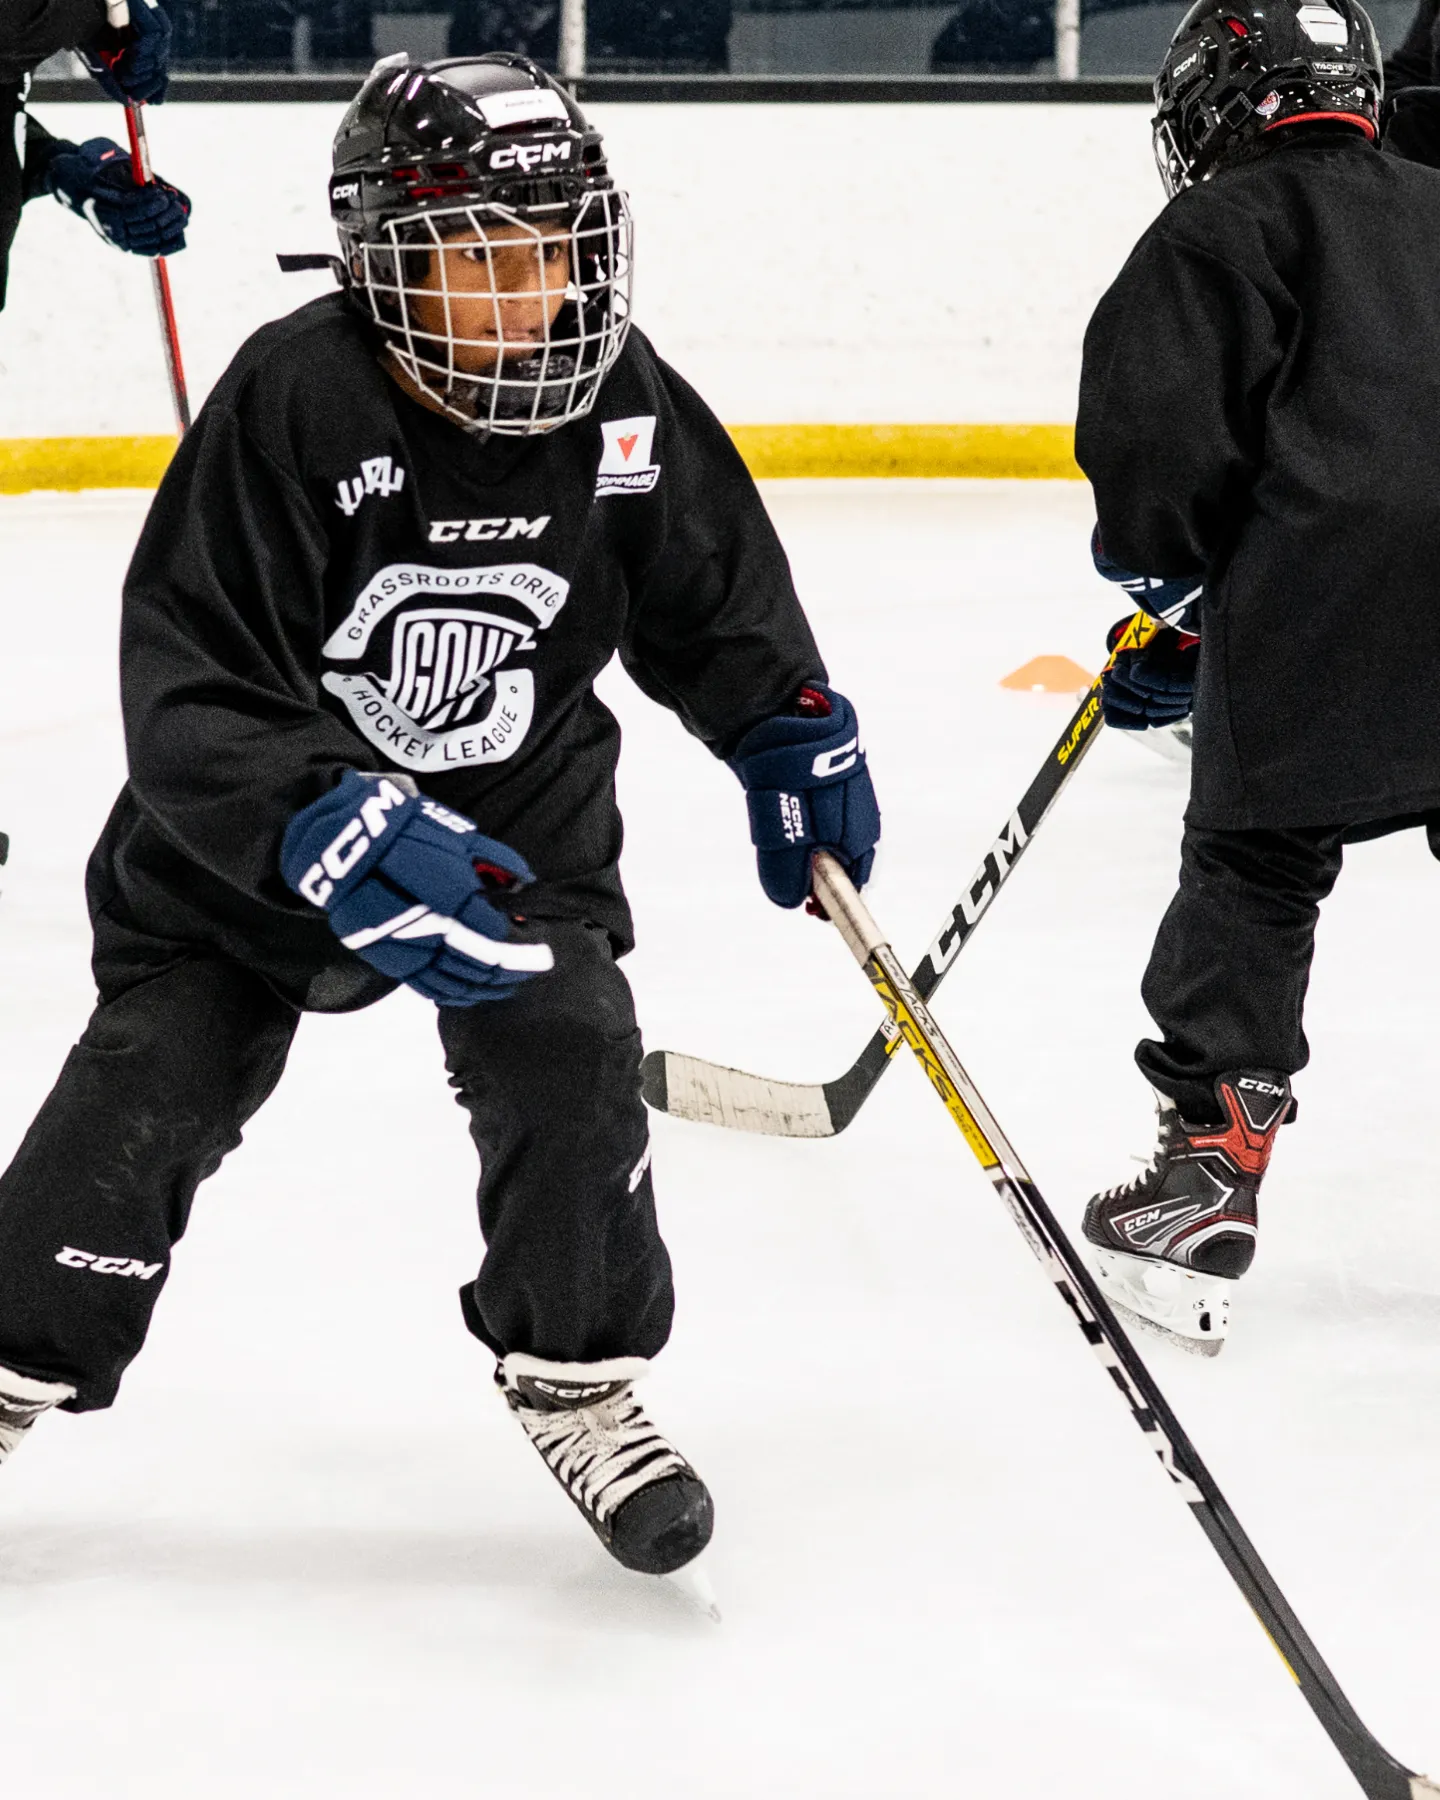 Enthusiastic young hockey player skillfully maneuvering on indoor ice rink during a lively game.